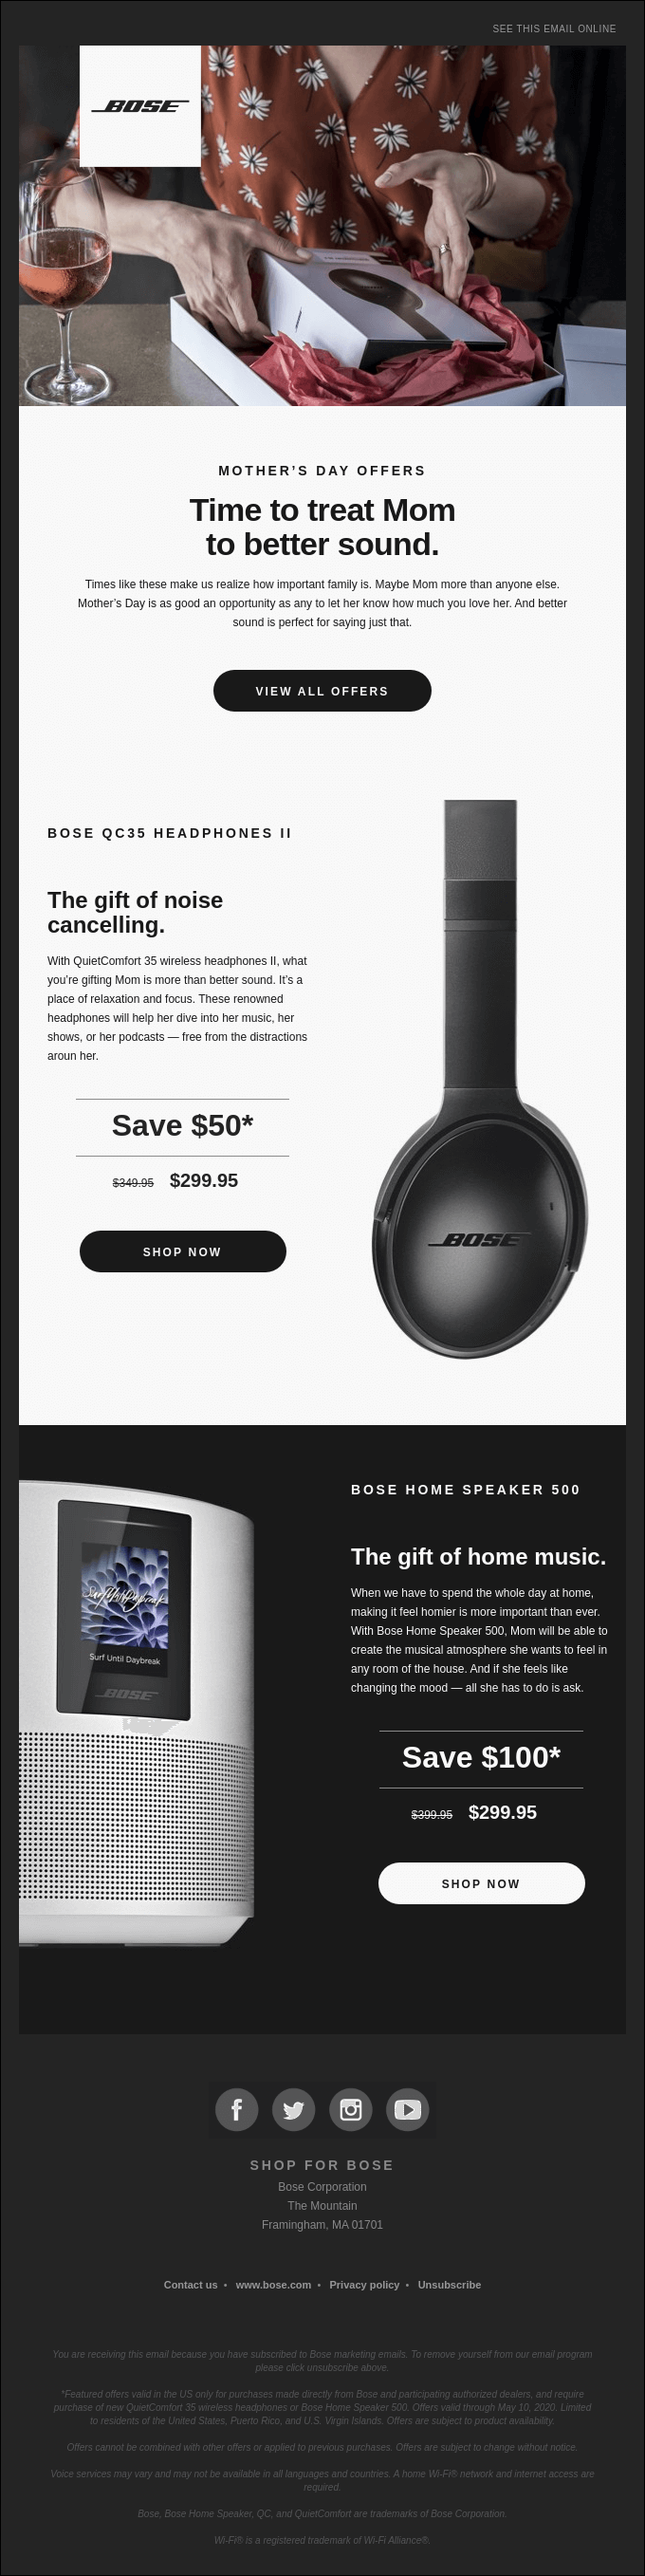 Bose's Mother's Day campaign strikes an emotional chord